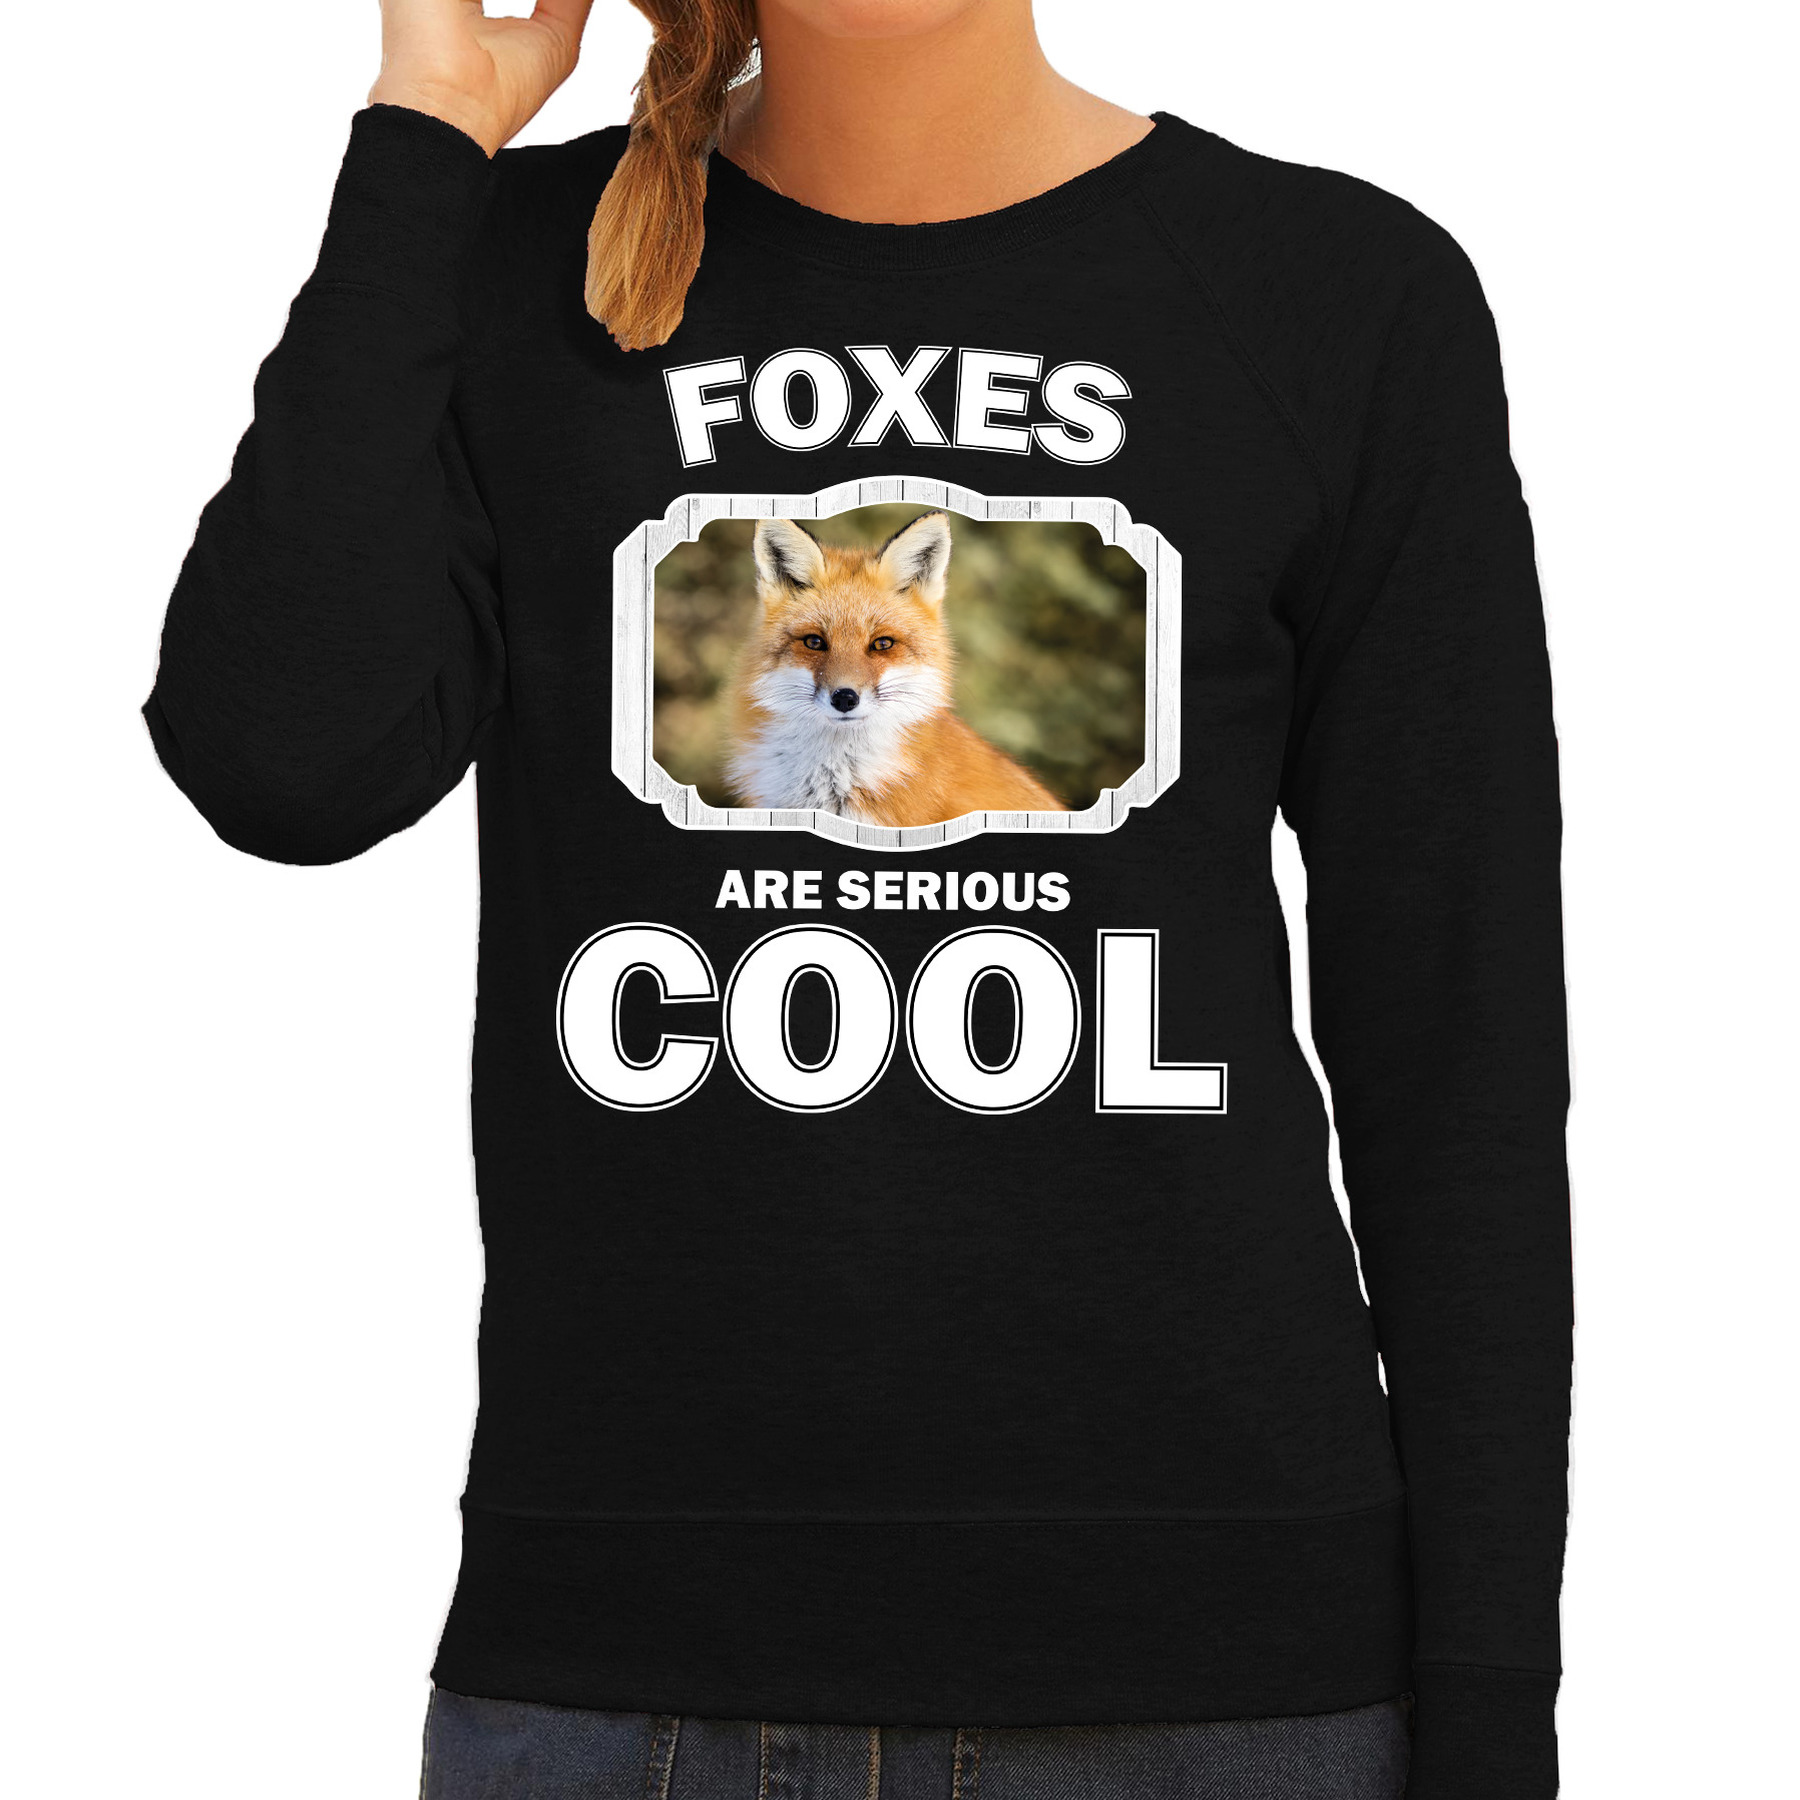 Sweater foxes are serious cool zwart dames - vossen/ vos trui